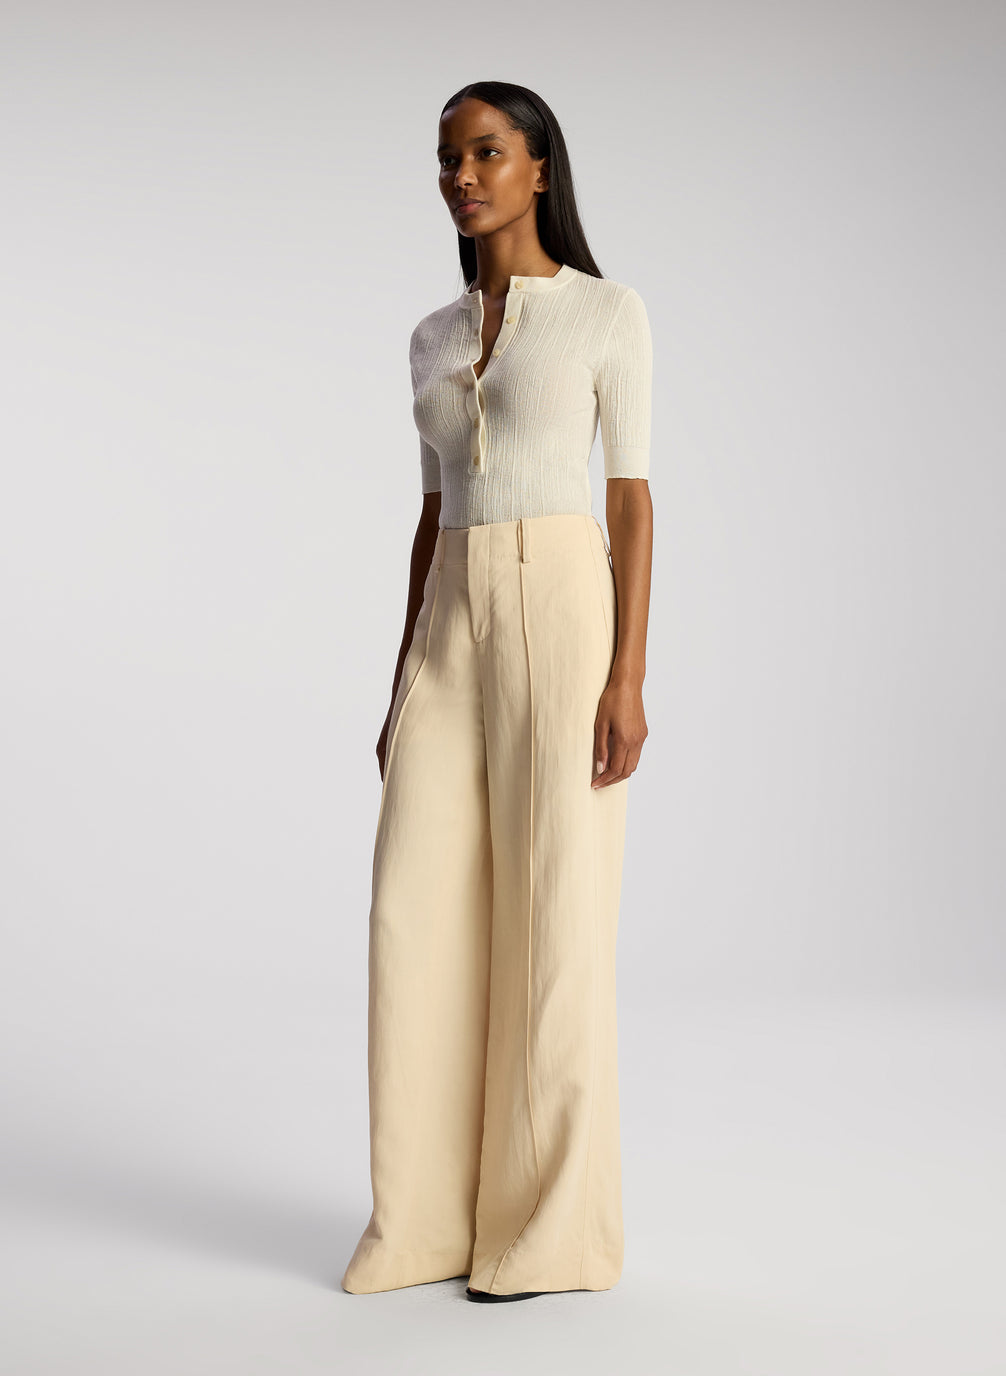 side view of woman wearing white top and cream wide leg pants